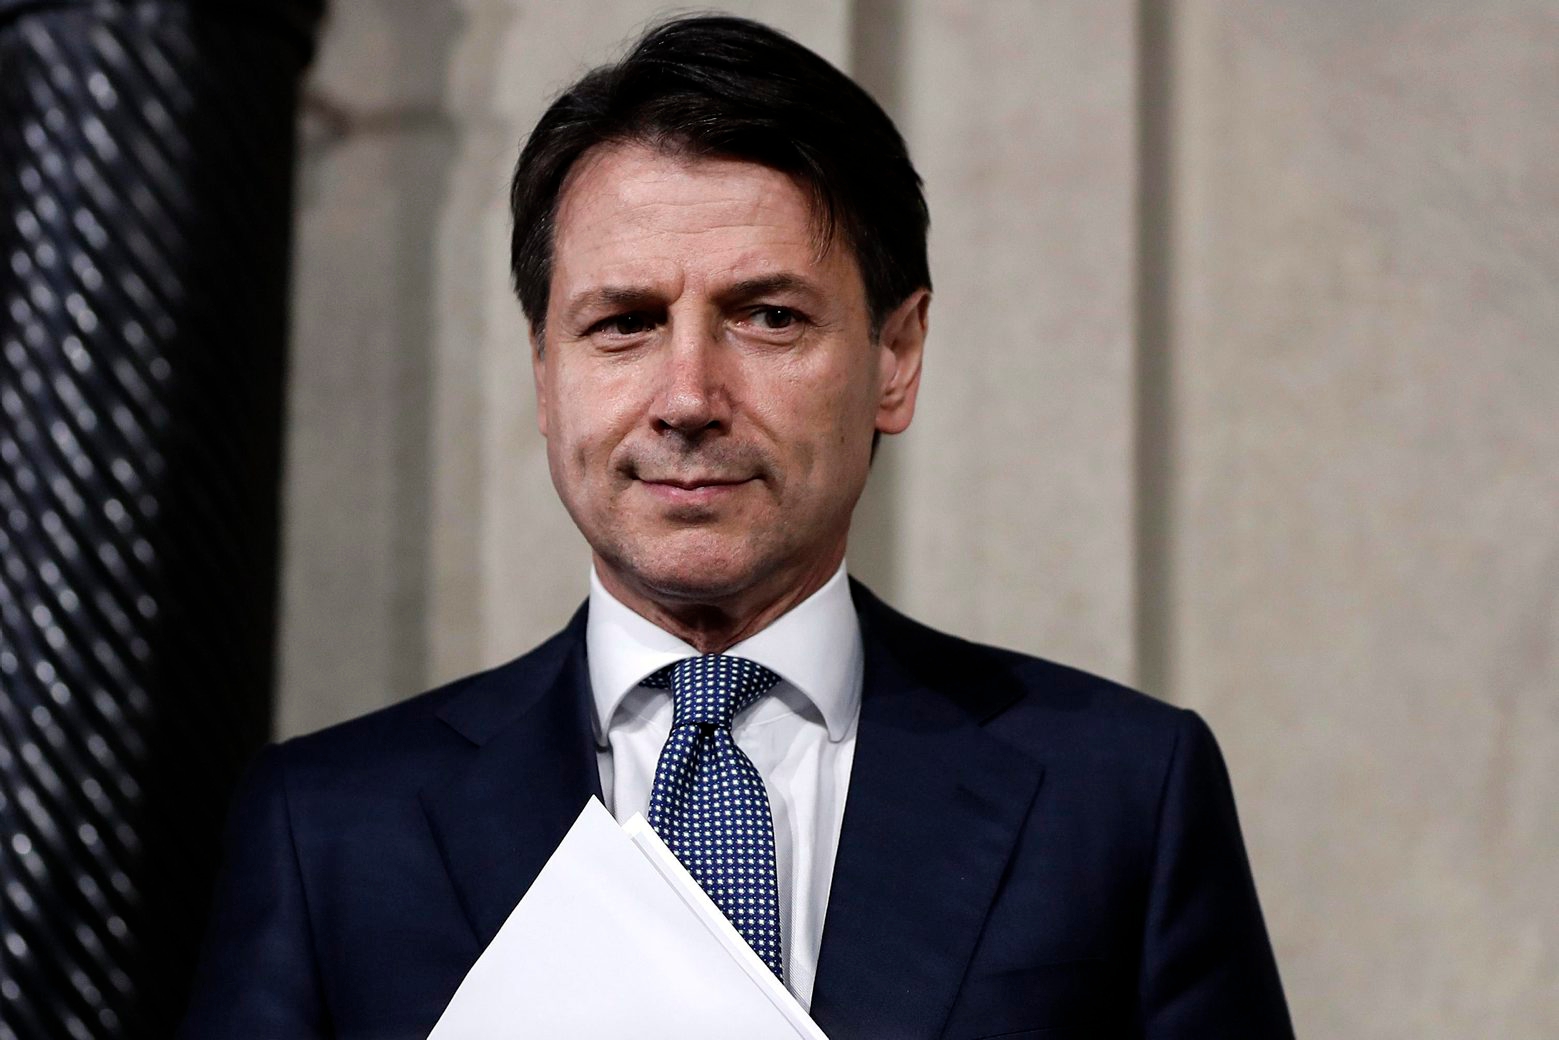 Giuseppe Conte addresses the media after meeting Italian President Sergio Mattarella, at the Quirinale presidential palace in Rome, Wednesday, May 23, 2018. Italy's president asked the political neophyte Giuseppe Conte to try to form a government Wednesday, giving the euroskeptic 5-Star Movement and League their first shot at running western Europe's first populist government. (Riccardo Antimiani/ANSA via AP) Italy Politics